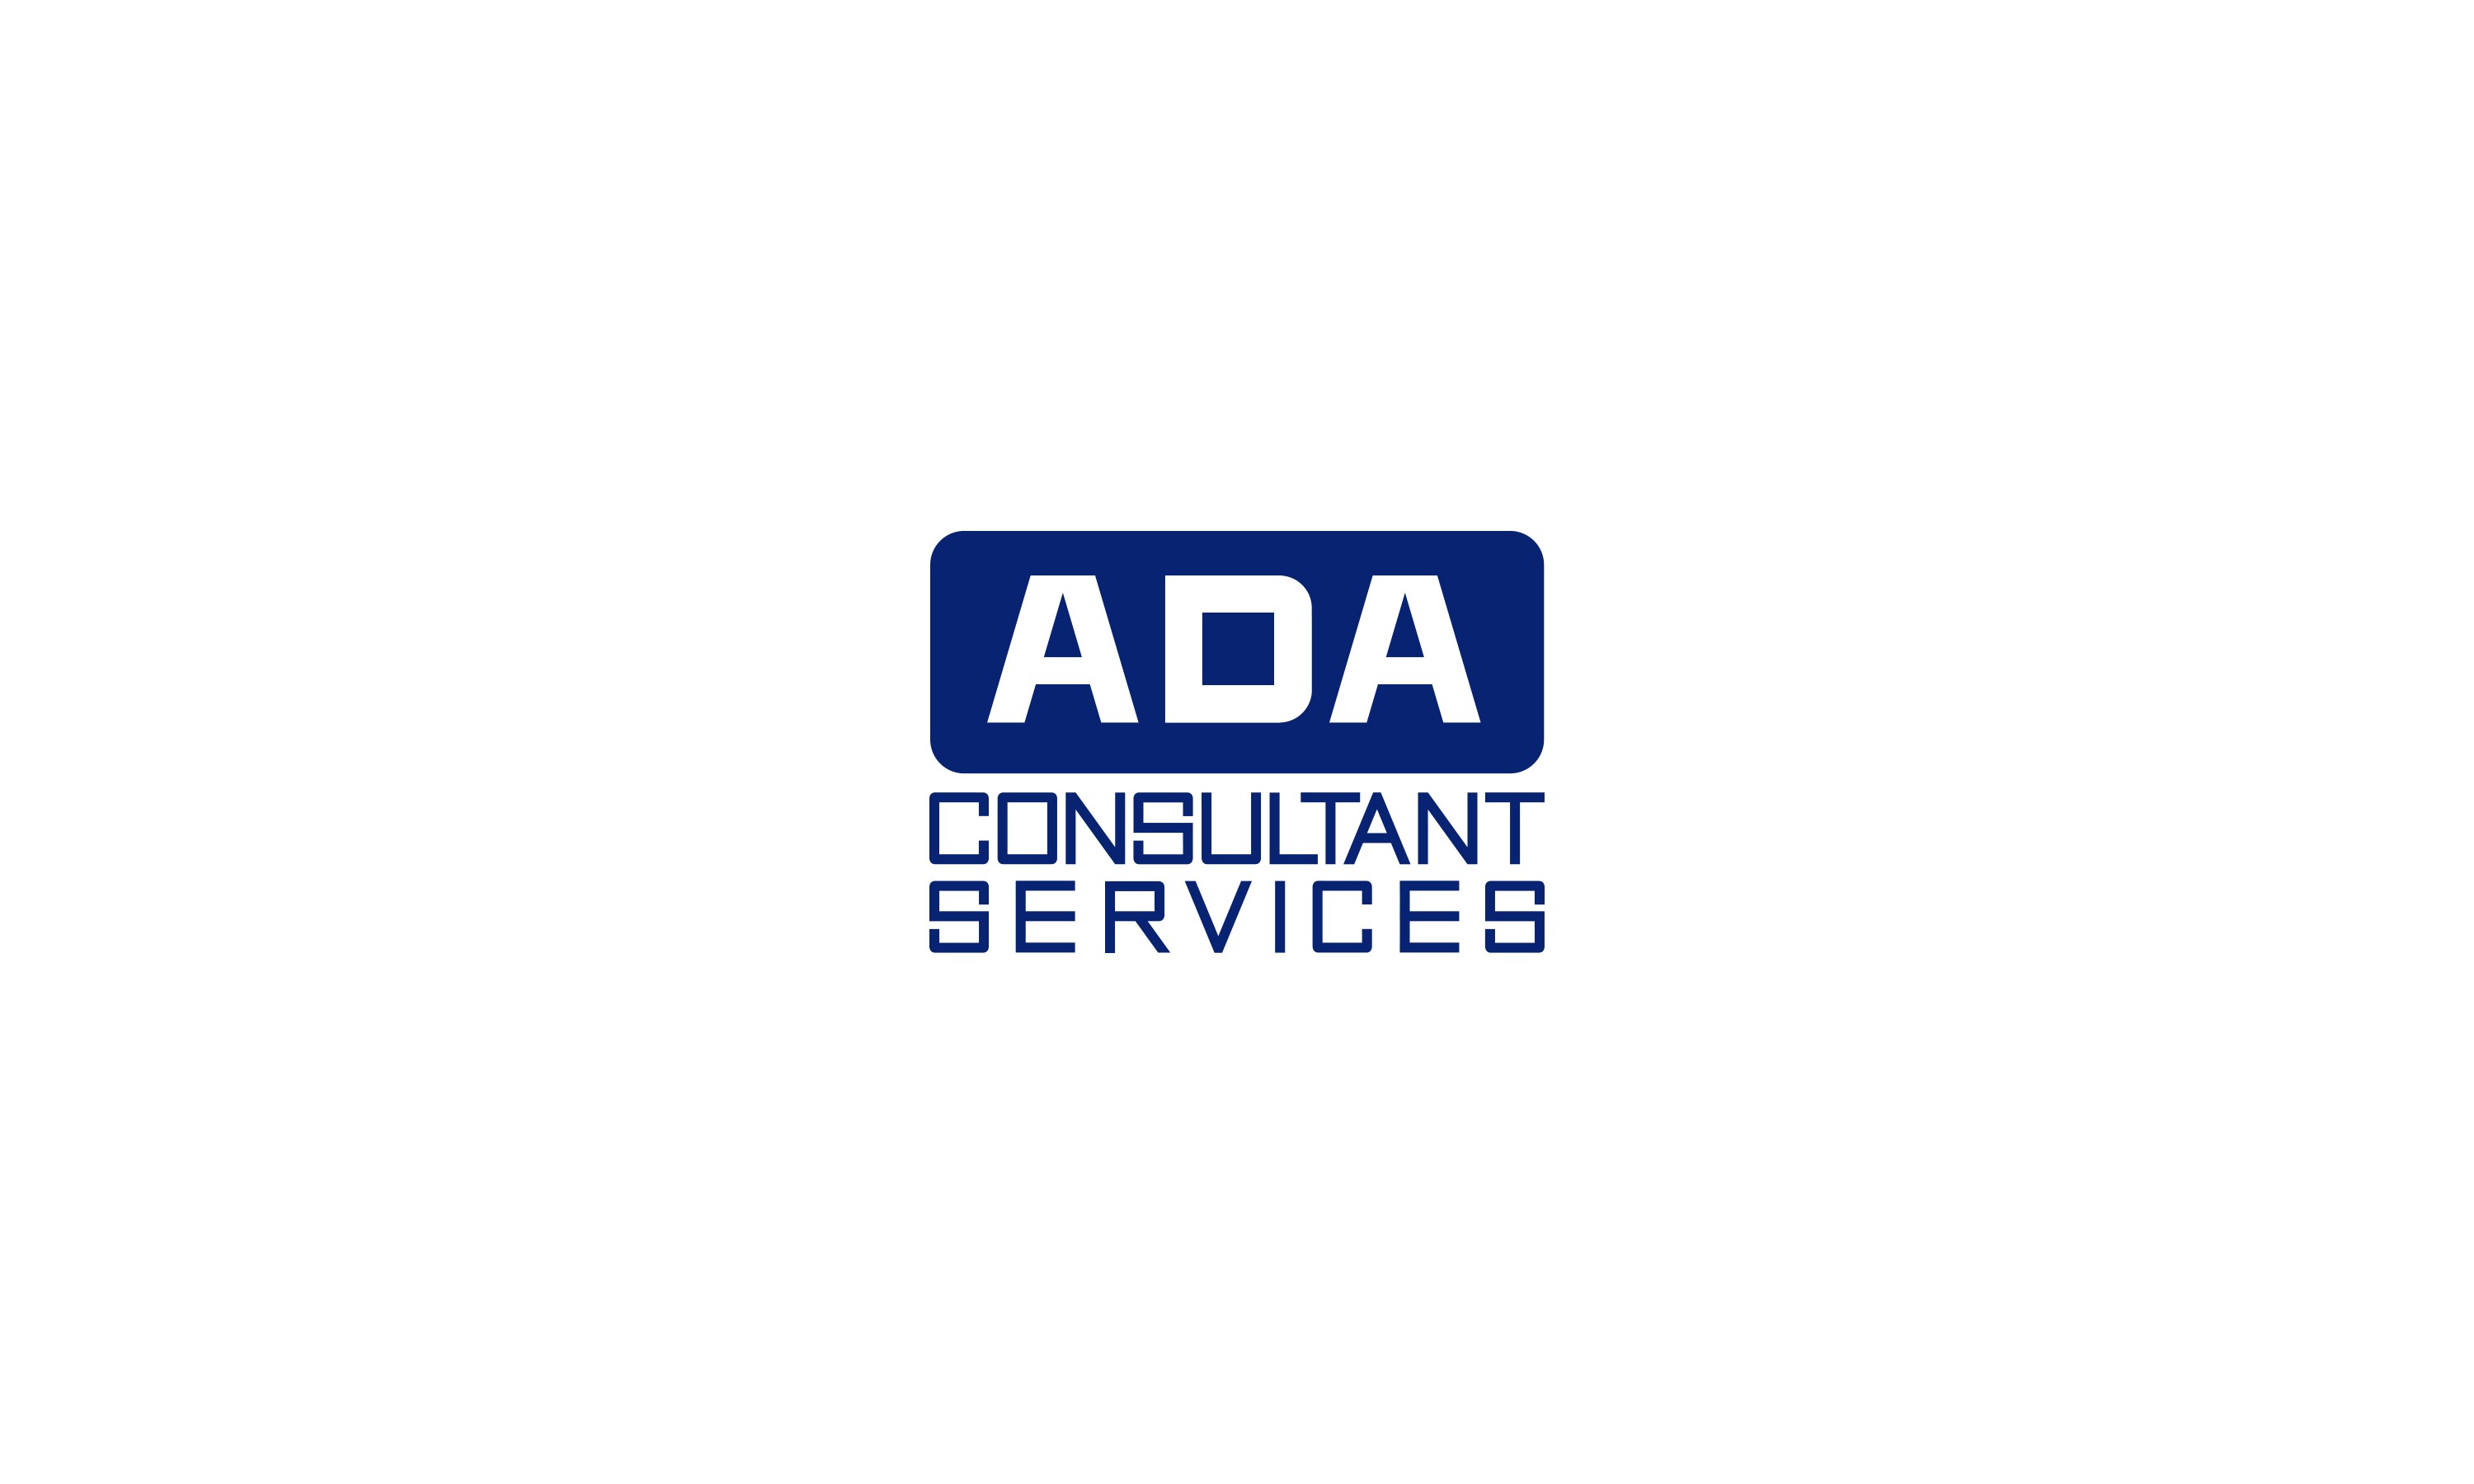 ADA certification services